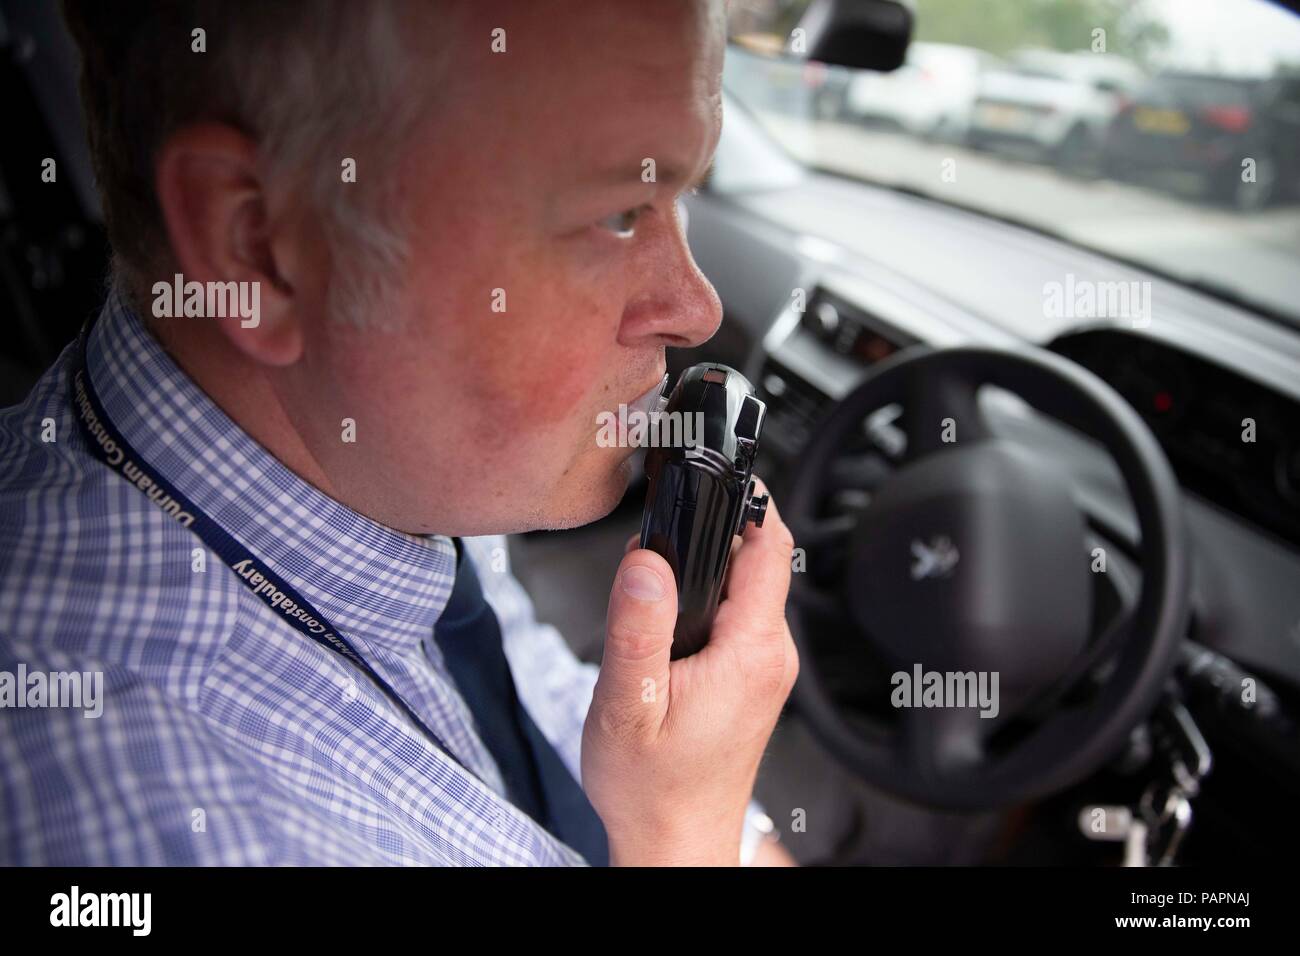 DI Andy Crowe demonstrates the in car alcohol interlock device which stops drink drivers from starting their engine if they are over the legal drink drive limit, at Durham Police headquarters. Stock Photo